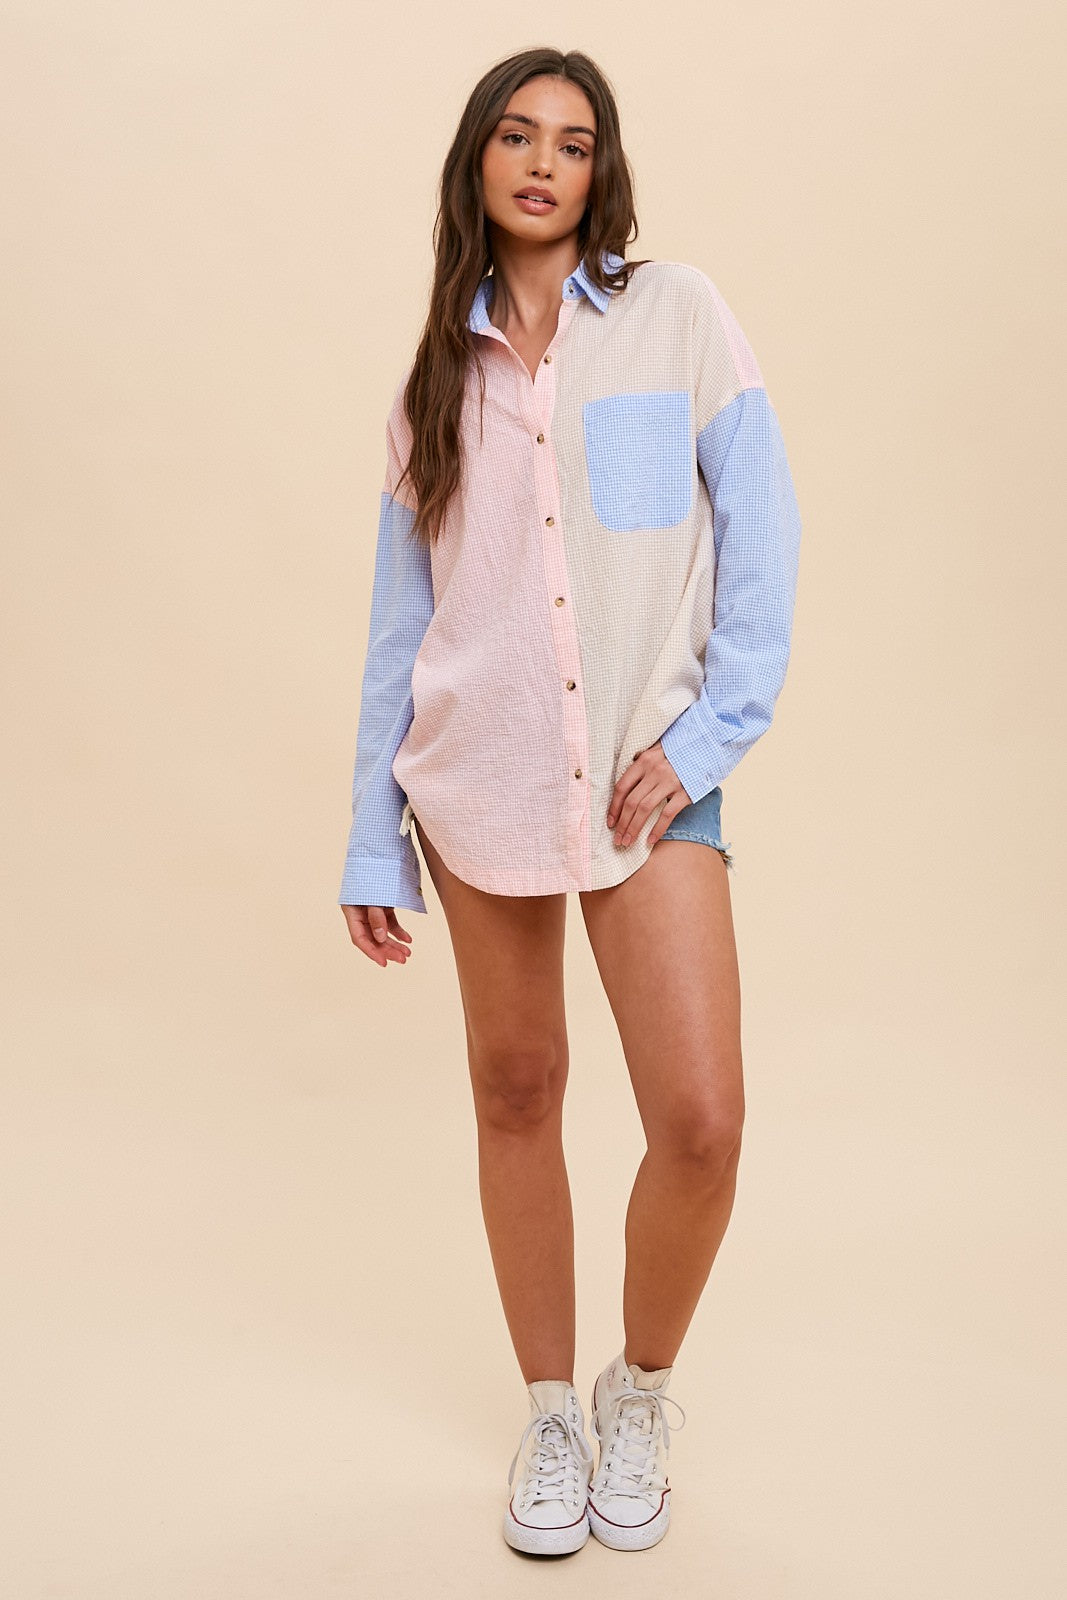 The Color Block Gingham Button Down